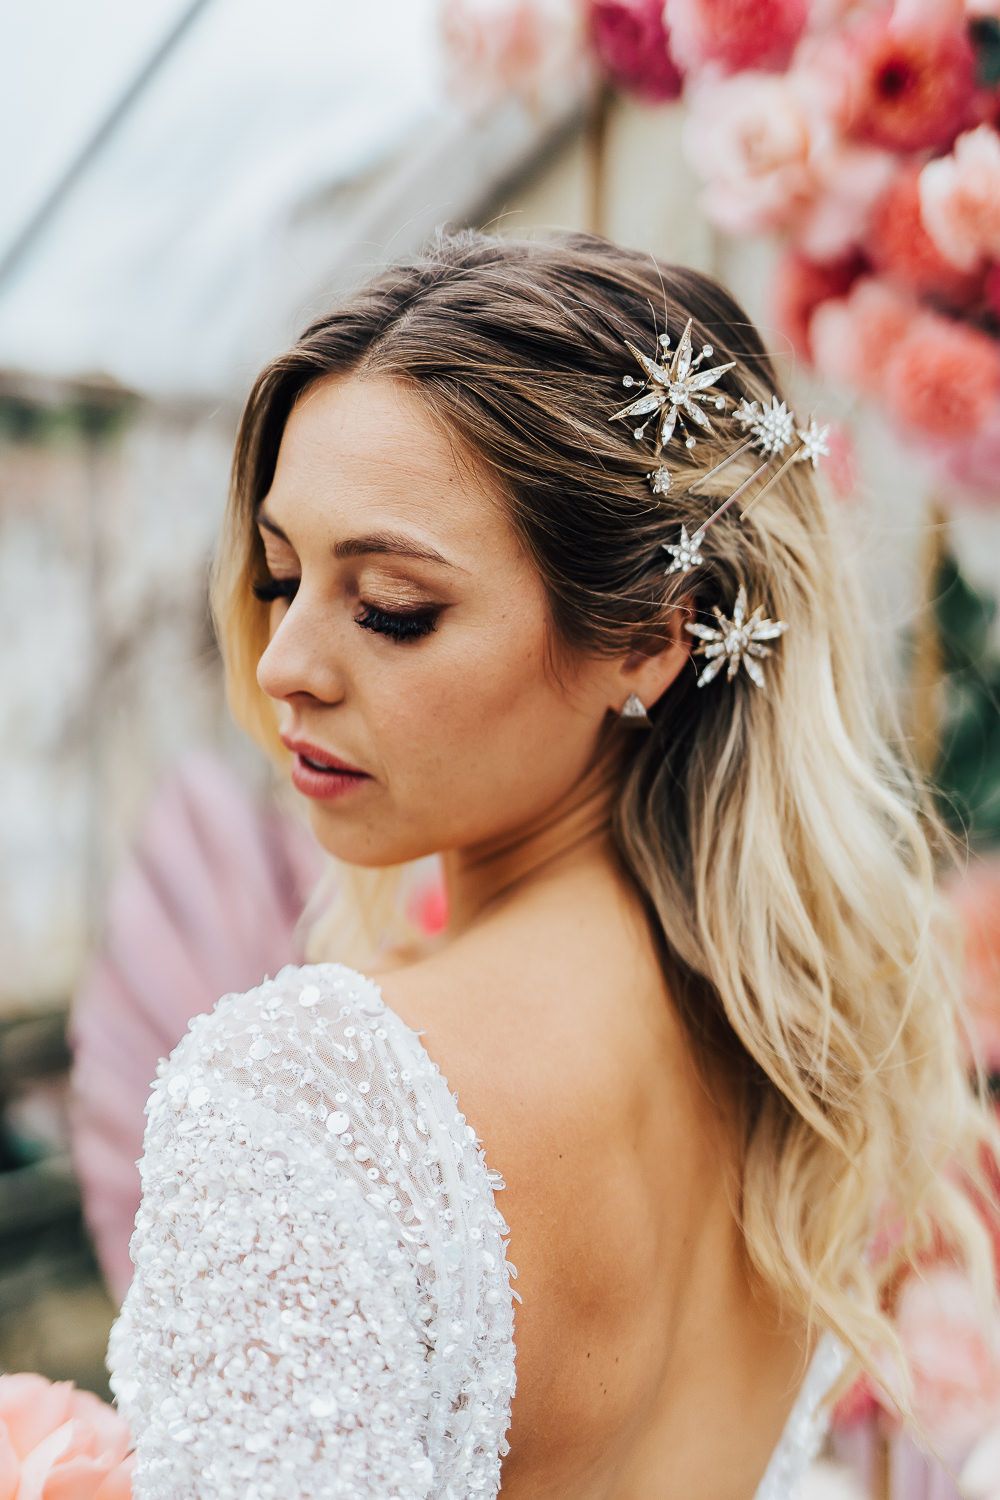 Trending Bridal Hairdos With Pearl Hair Accessories to add charm!